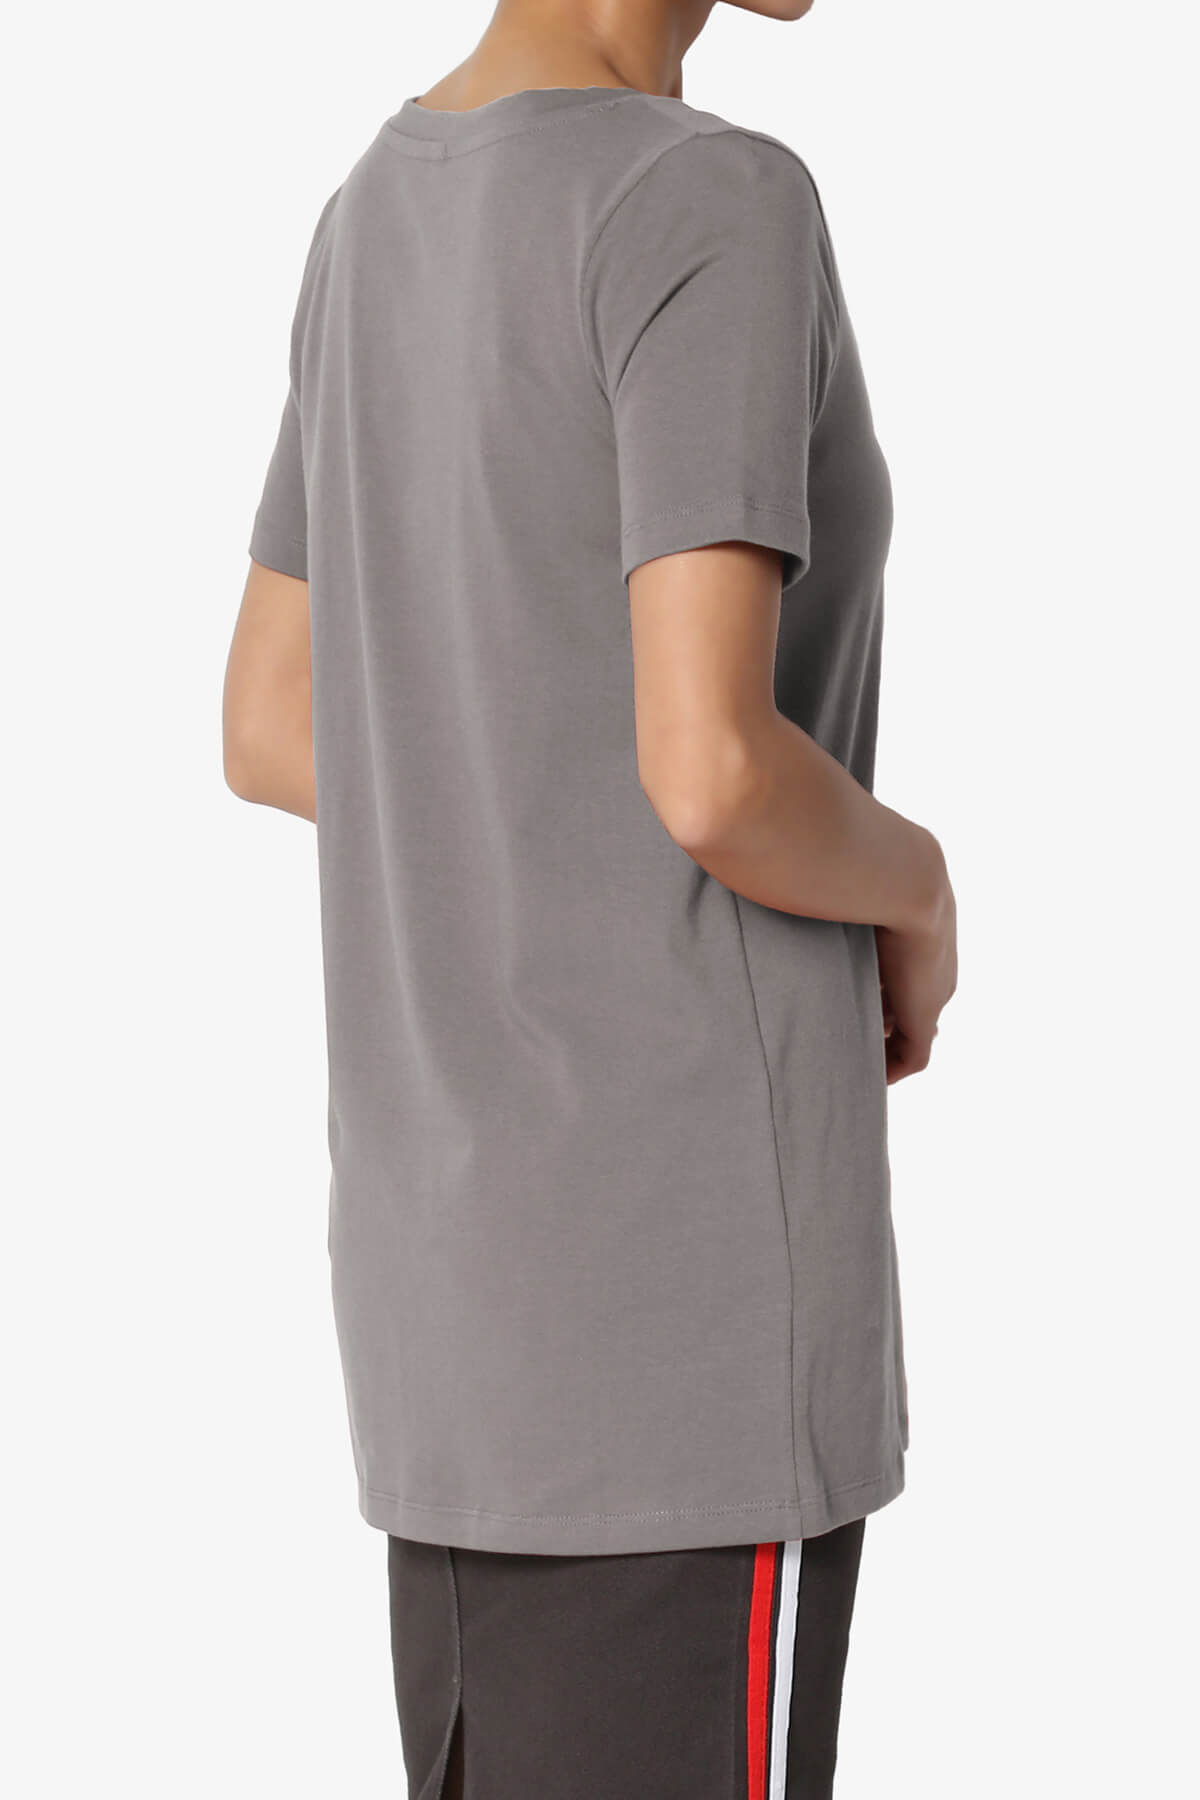 Load image into Gallery viewer, Elora V-Neck Short Sleeve T-Shirt GREY_4
